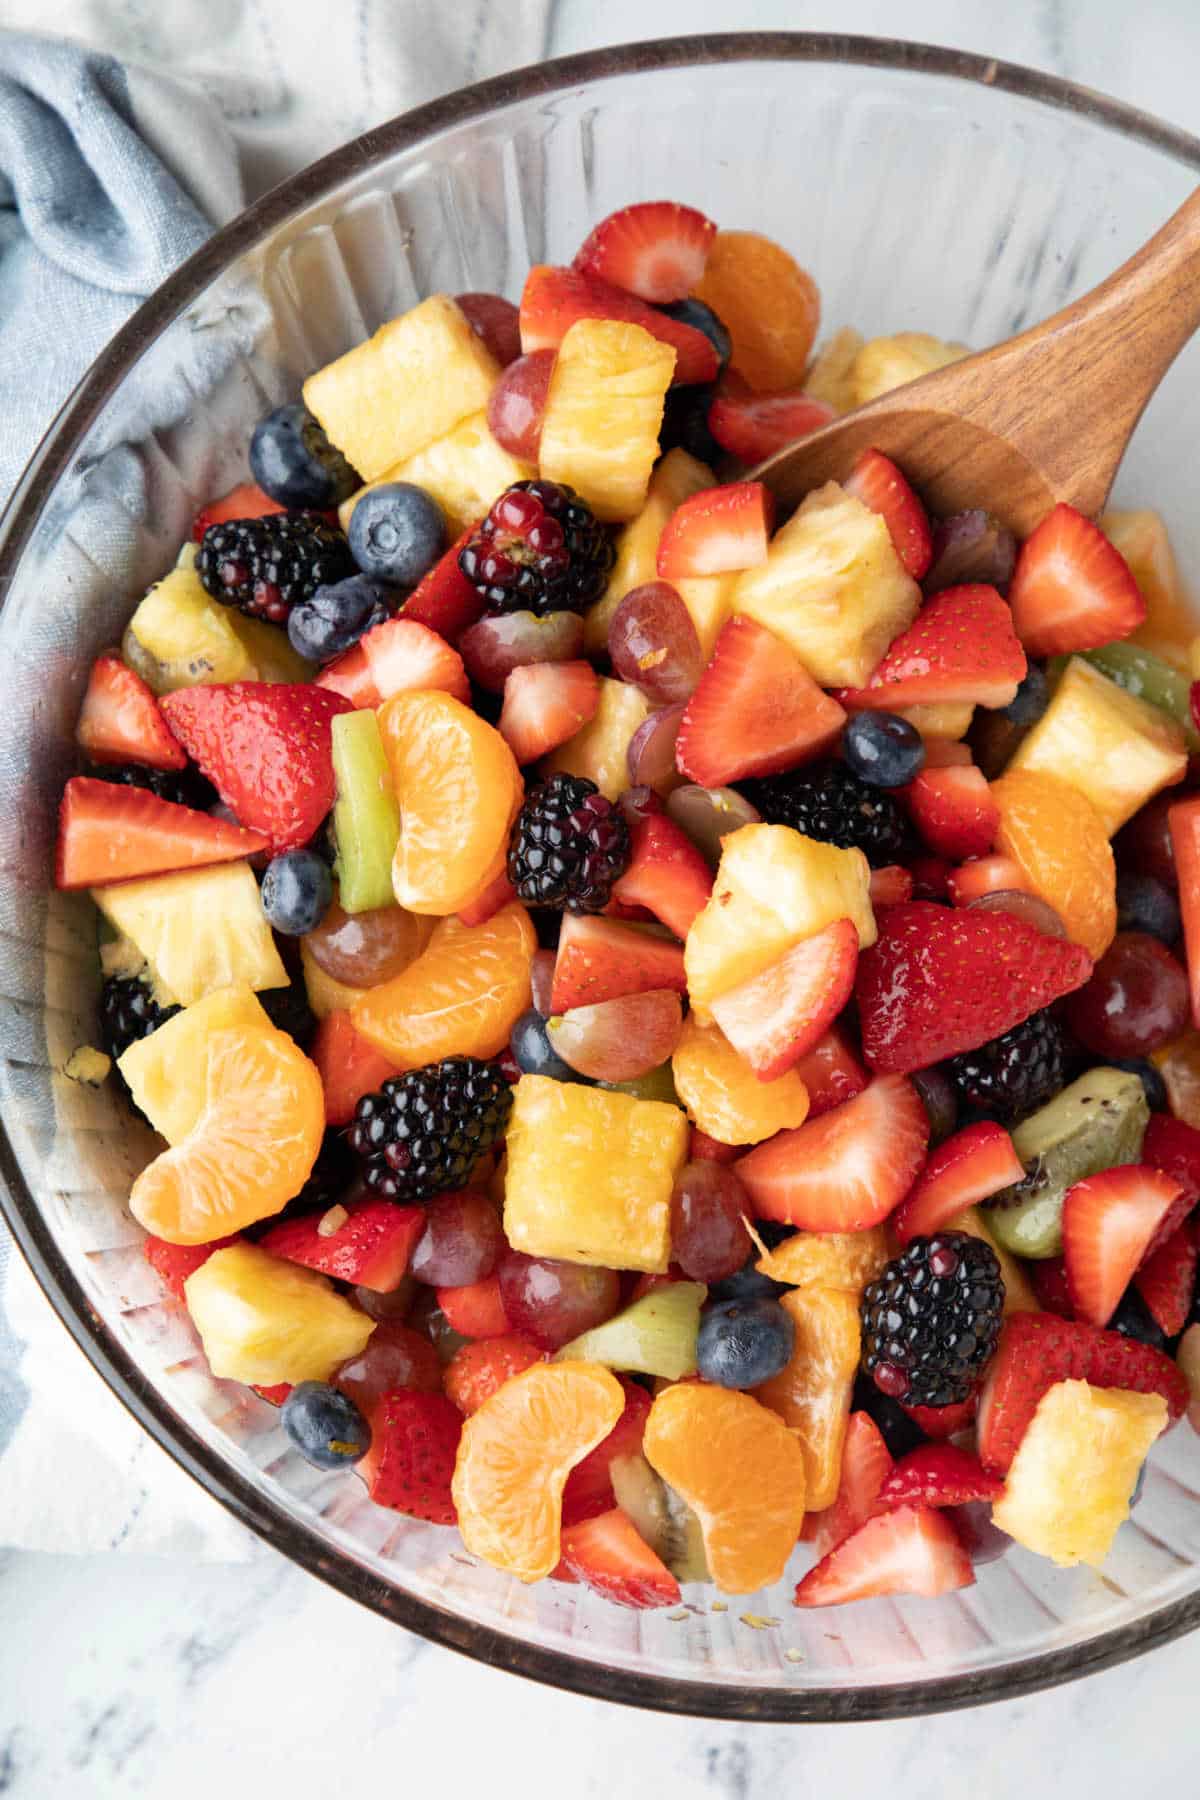 Easy Fruit Salad With Orange Juice - The Delicious Crescent